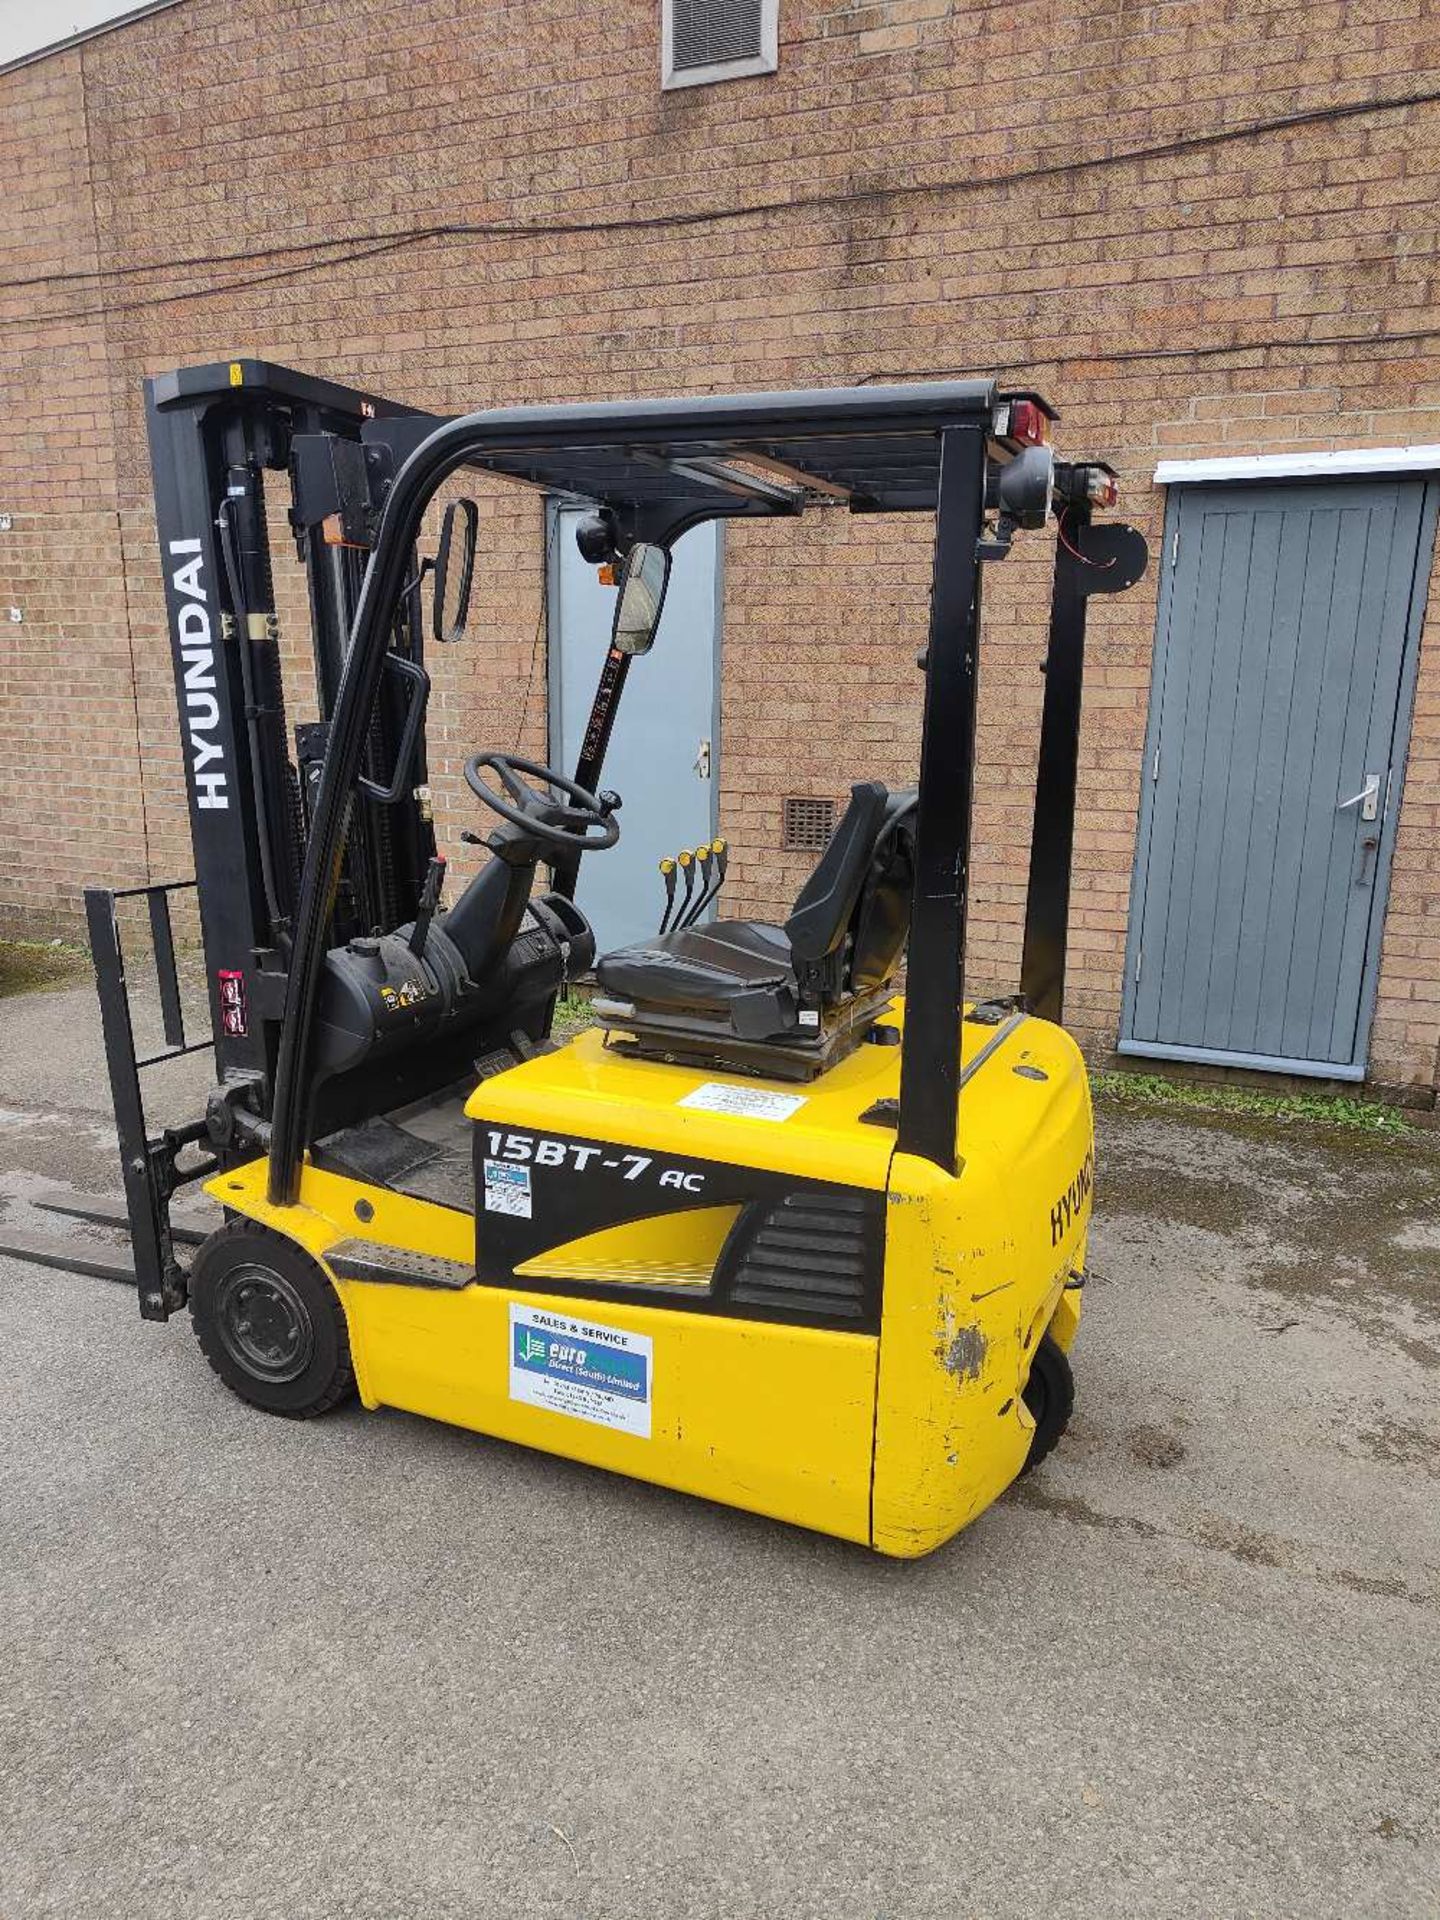 Hyundai 15BT-7 Electric Forklift - Image 4 of 12